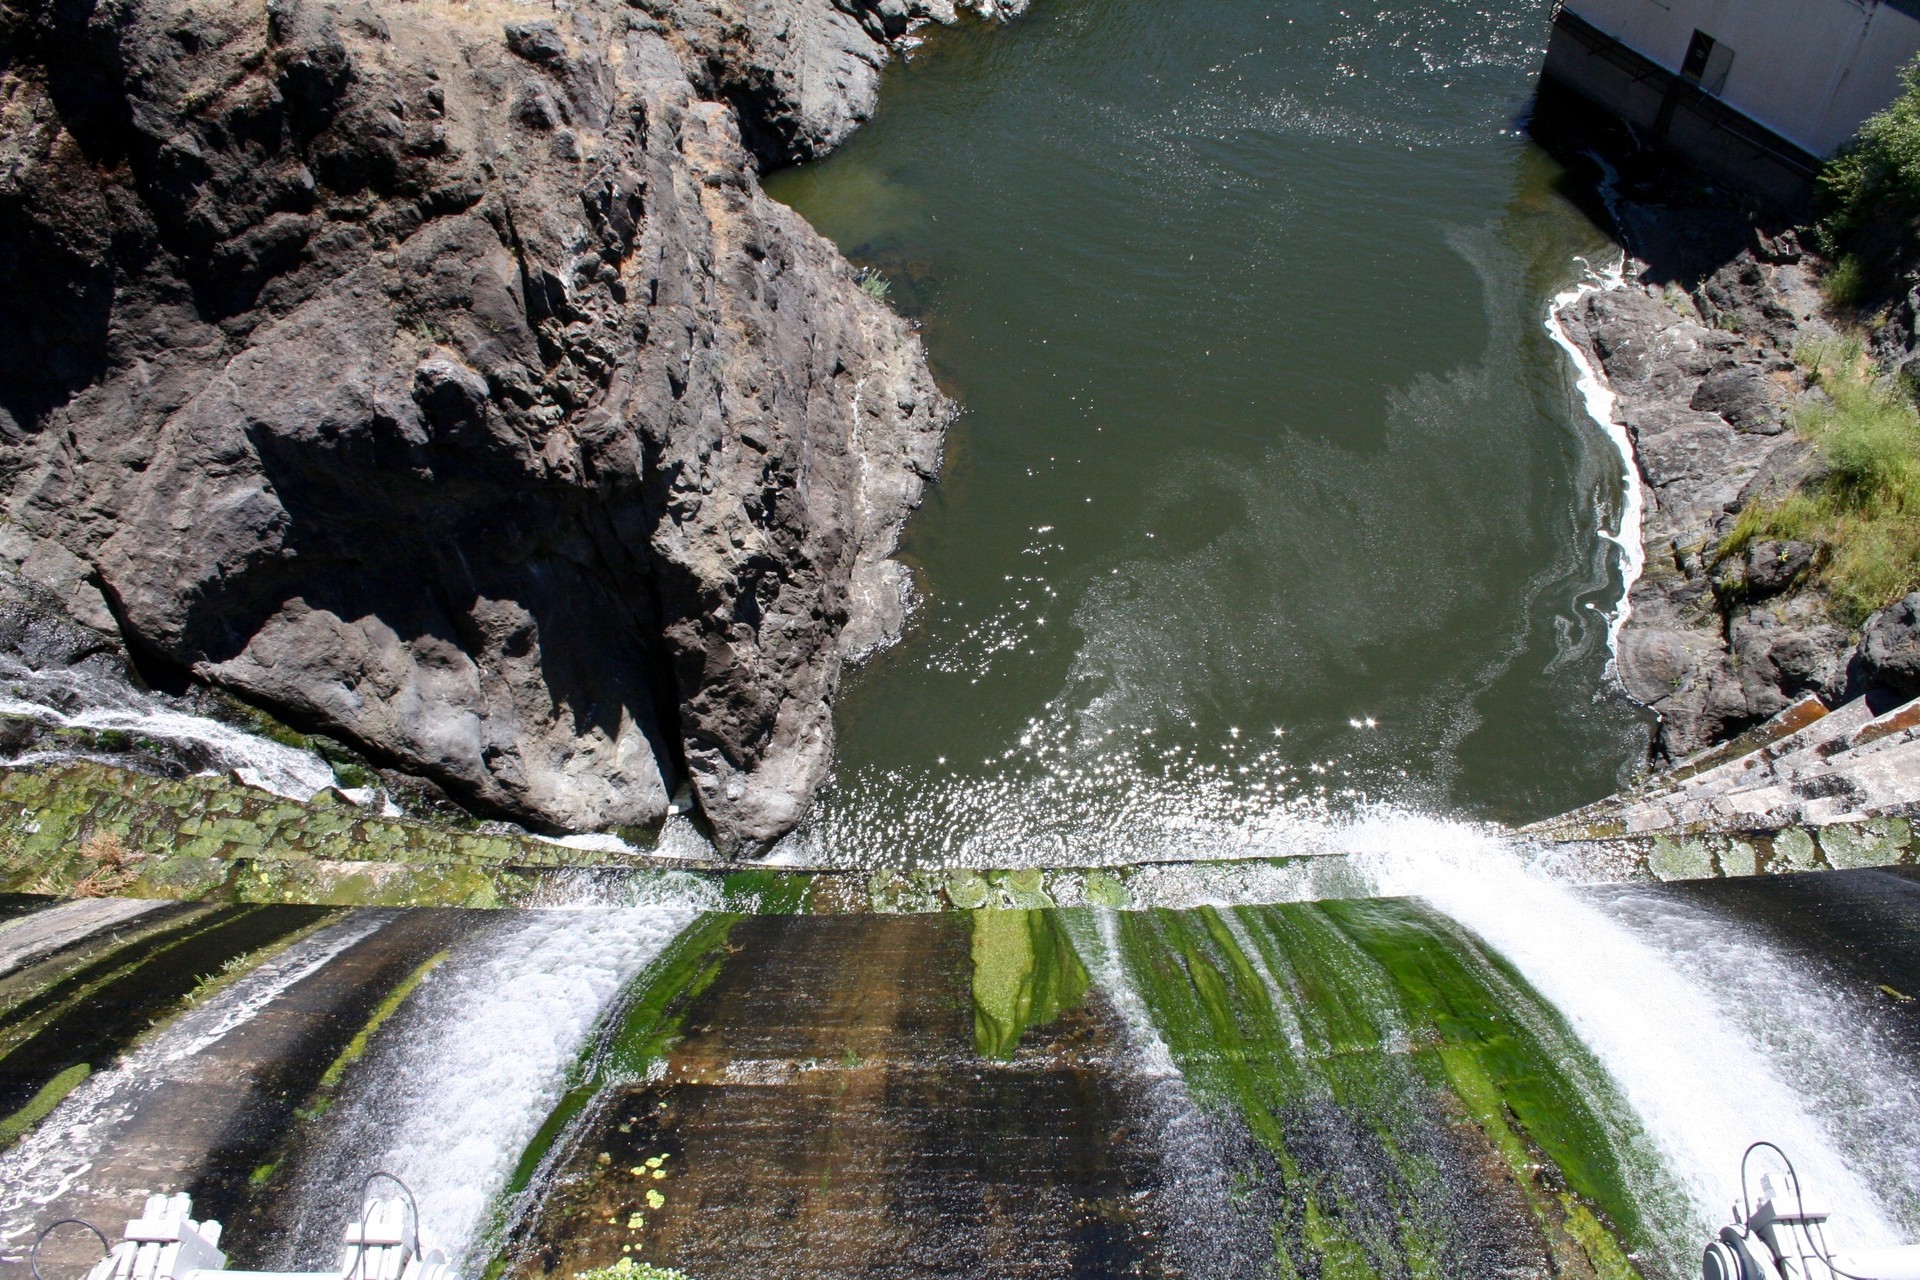 The 132-foot-high Copco 1 Dam, on the Klamath River upstream of the Siskiyou County hamlet of Hornbrook, has generated power for nearly a century.